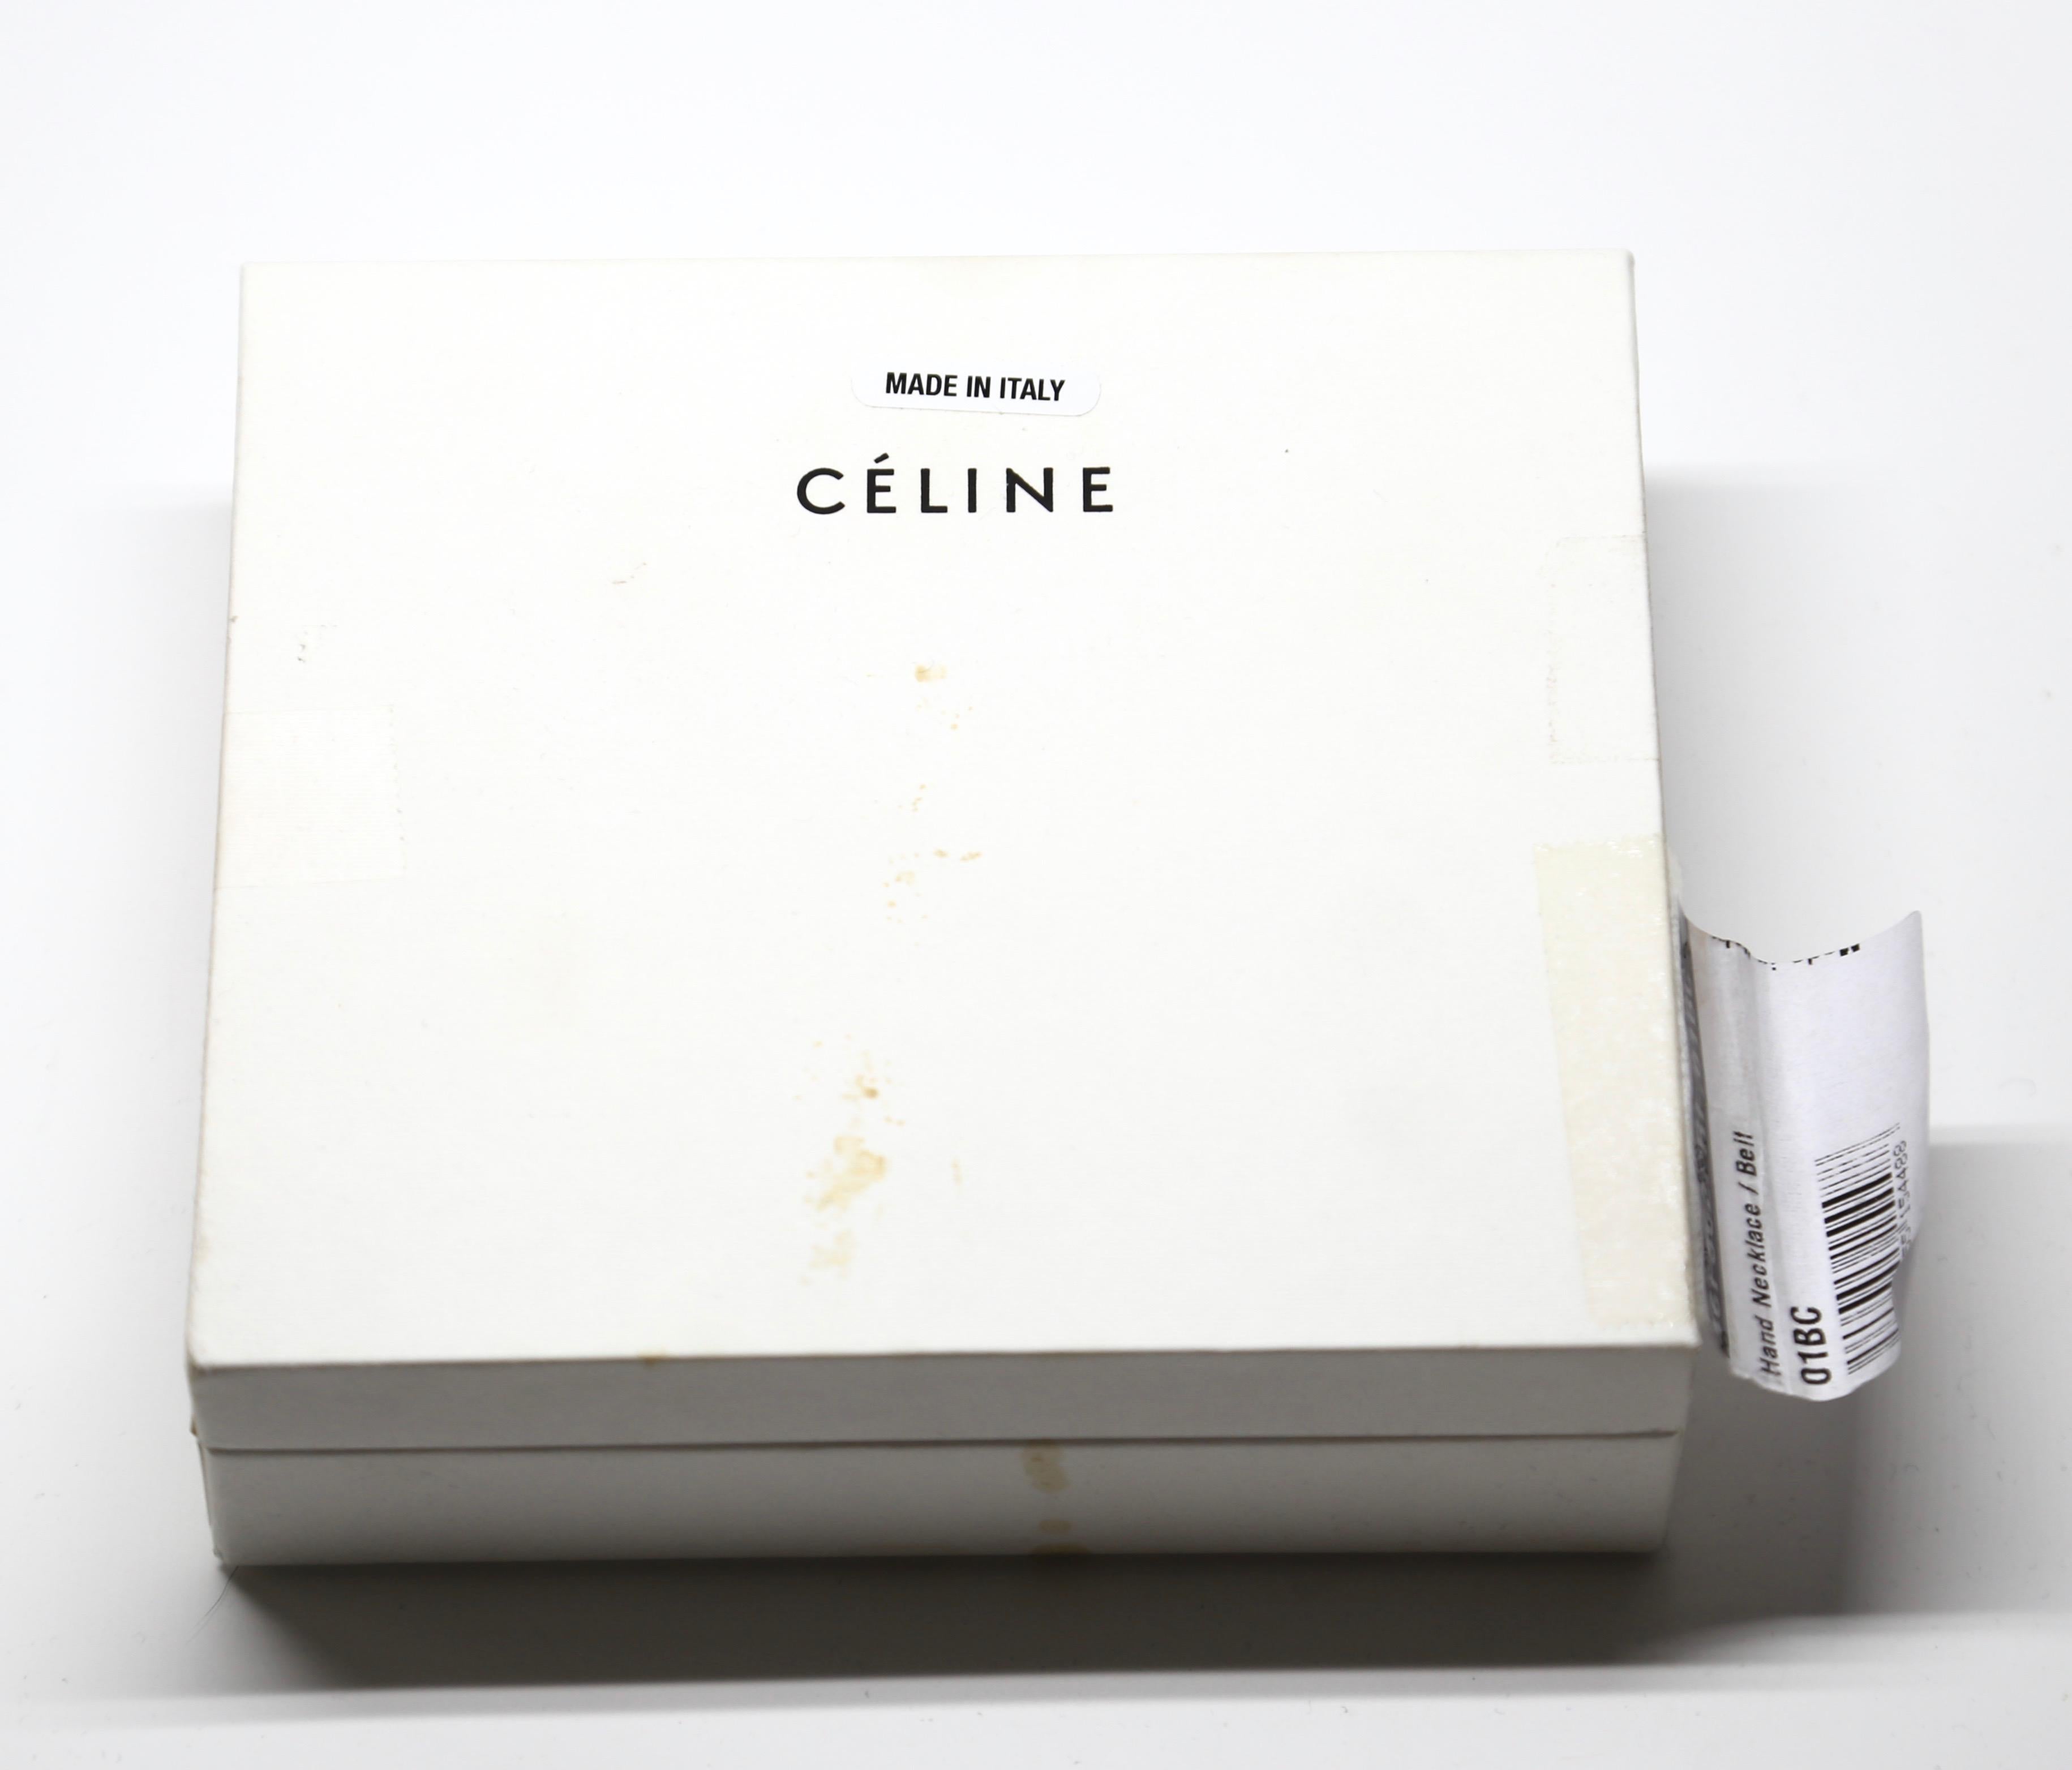 2014 CELINE by PHOEBE PHILO porcelain hand necklace by LIMOGES 1